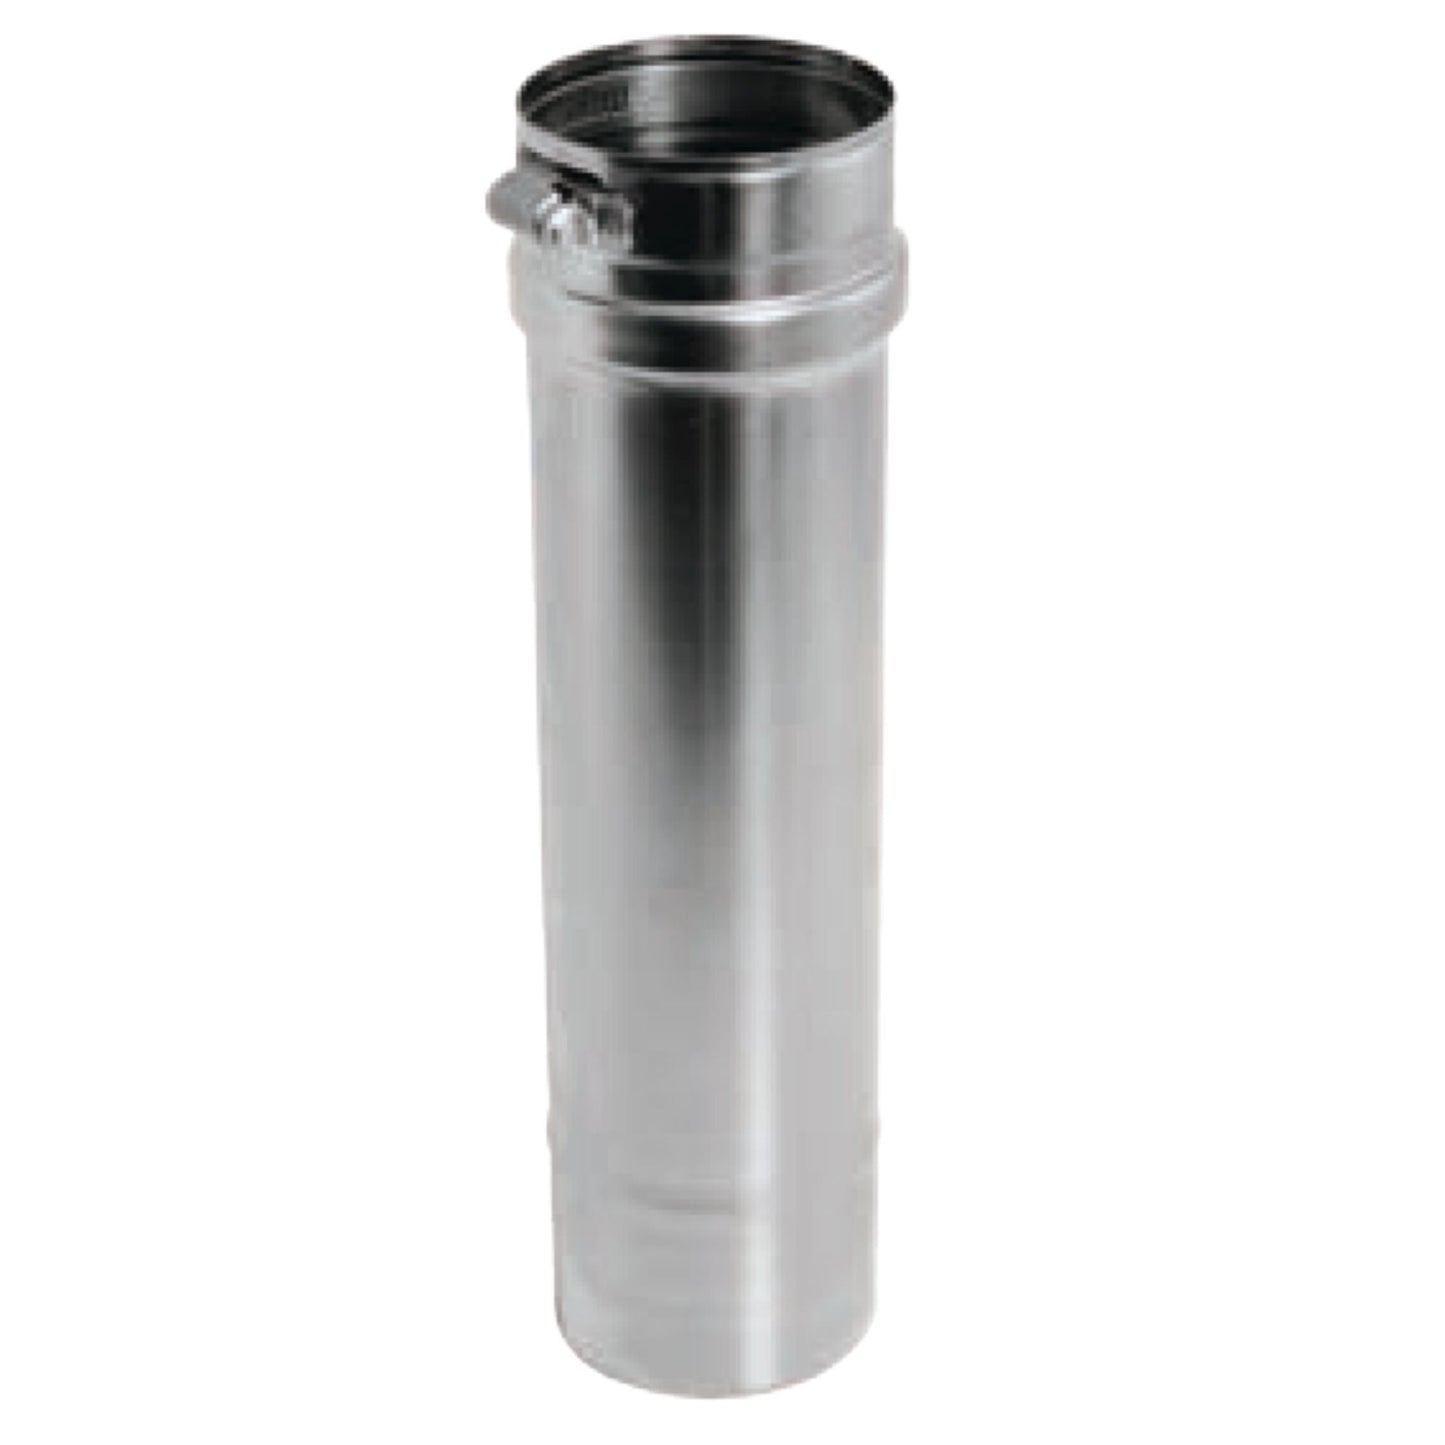 DuraVent FasNSeal 8" x 6" 316L Stainless Steel Vent Length